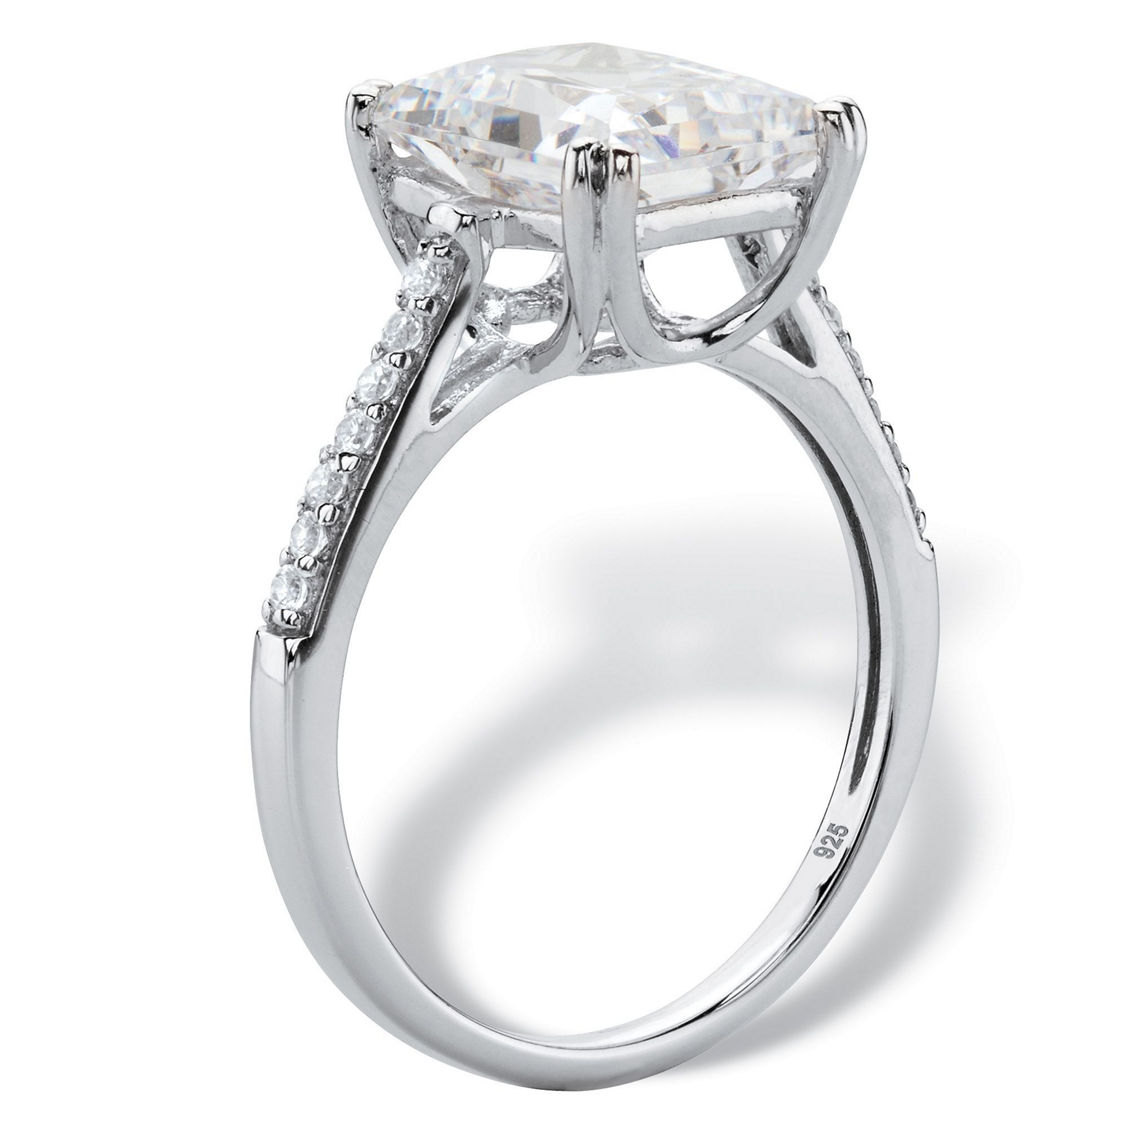 PalmBeach Emerald-Cut CZ Platinum-plated Sterling Silver Bridal Engagement Ring - Image 2 of 5